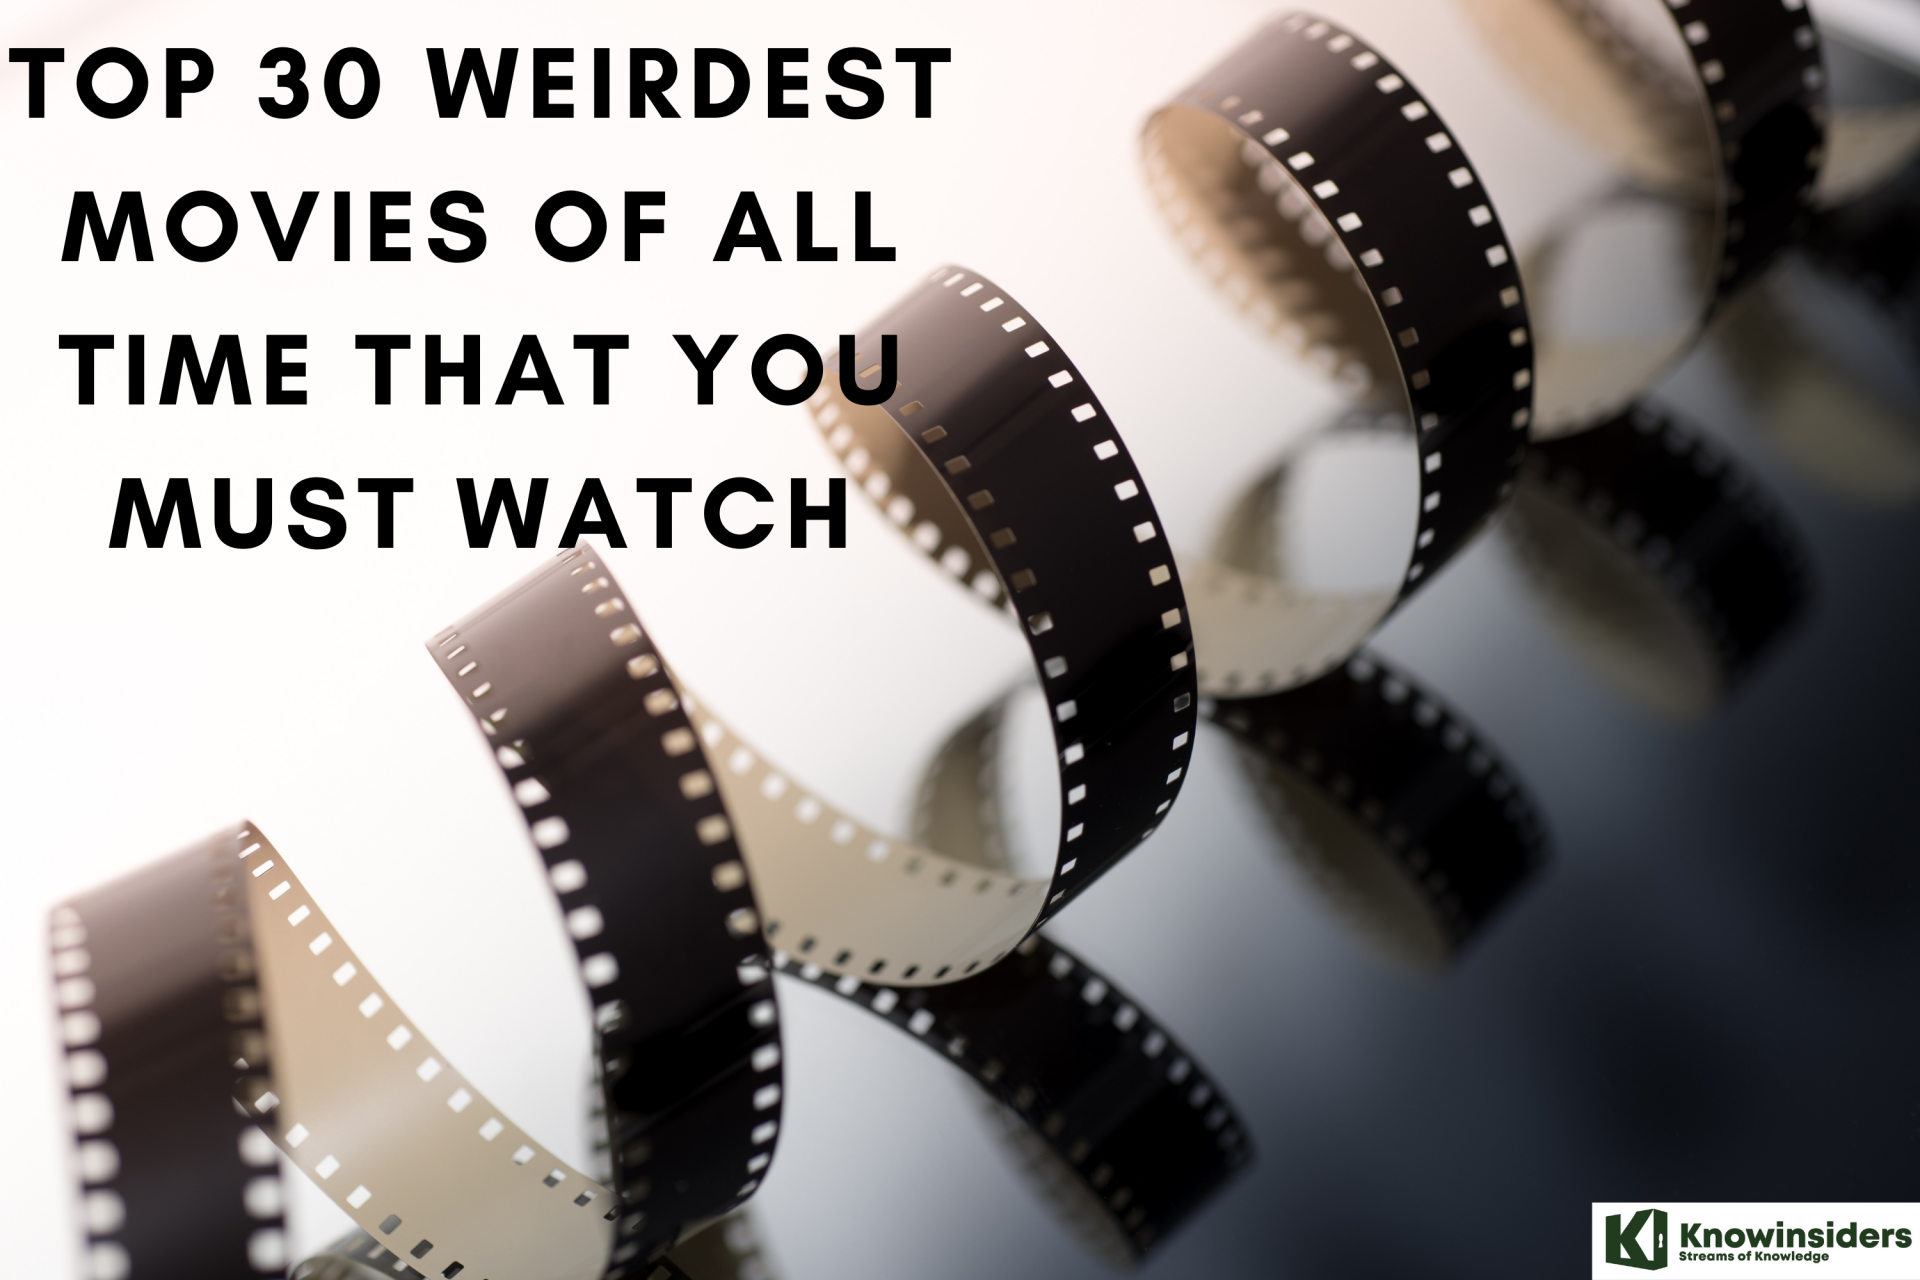 Top 30 Weirdest Movies of All Time That You Must Watch Right Now